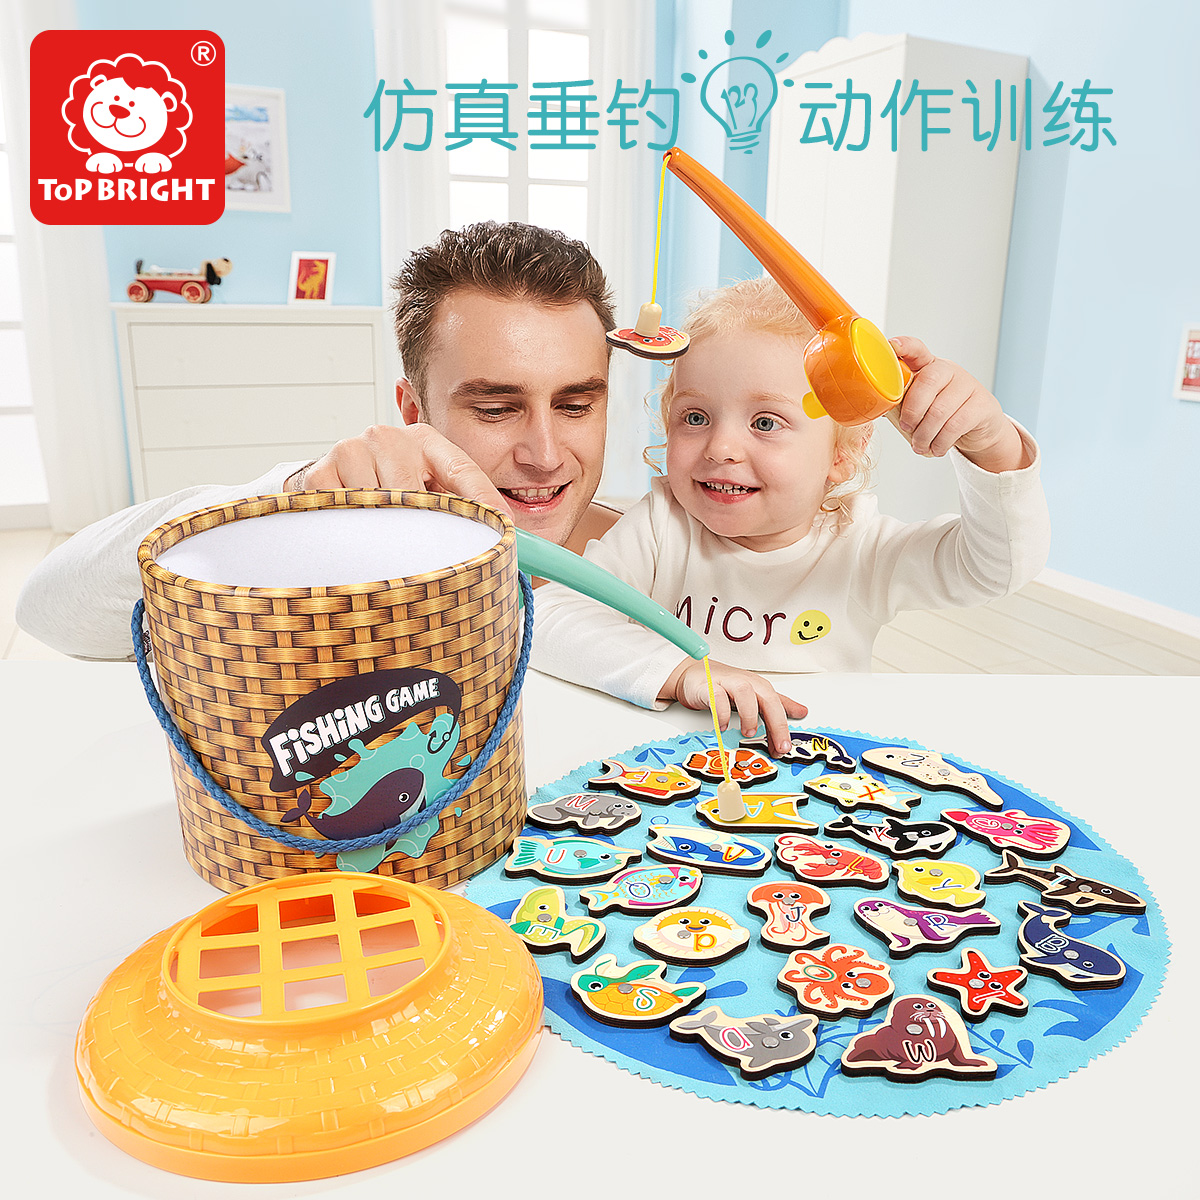 Tebor kitten fishing toy boys and girls 1-3 years old babies puzzle toys parent-child magnetic fish pond suit